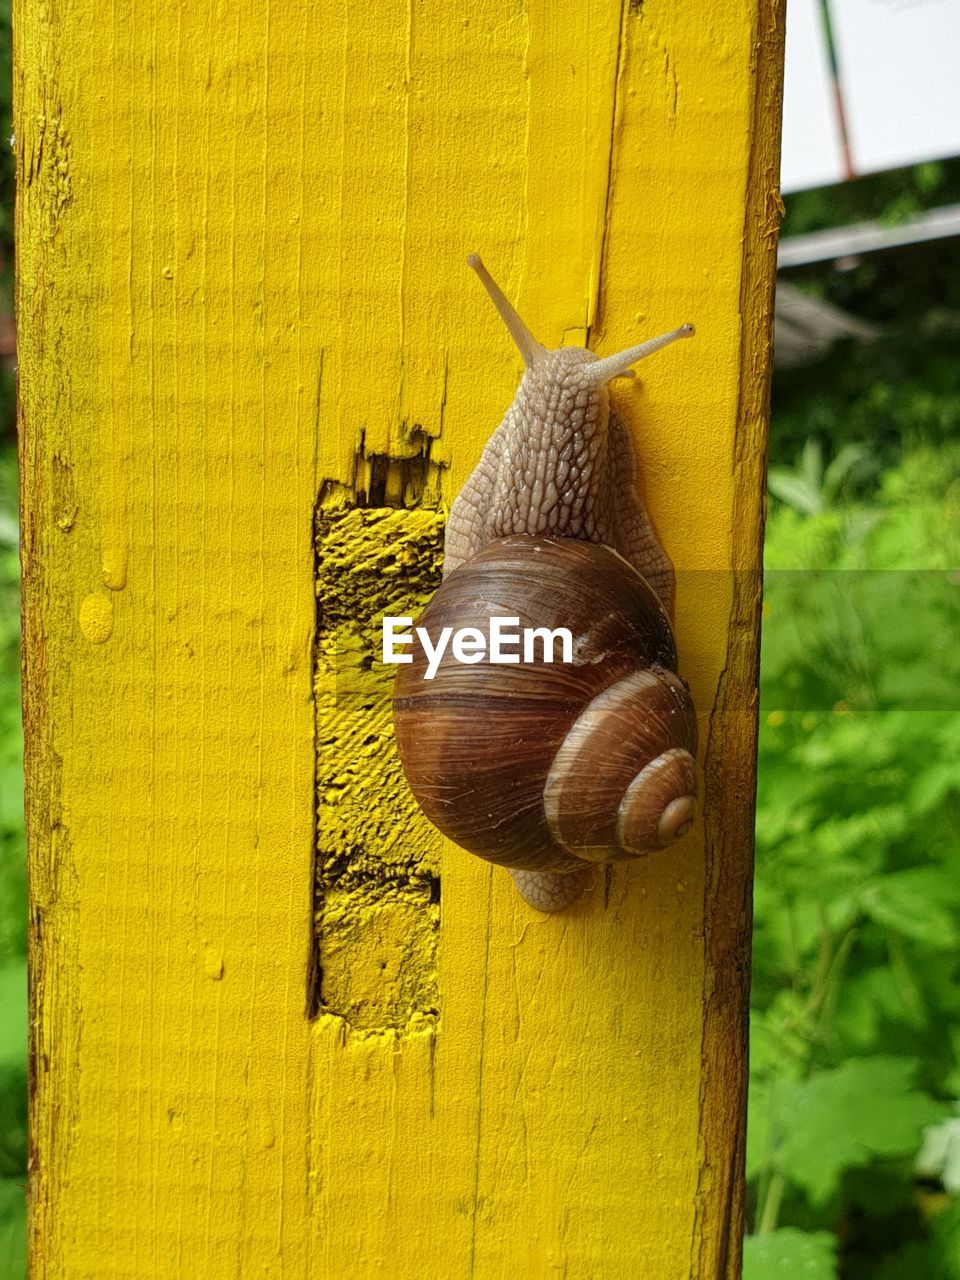 yellow, animal wildlife, animal, animal themes, snail, gastropod, snails and slugs, wildlife, one animal, mollusk, wood, no people, close-up, day, nature, animal antenna, leaf, insect, outdoors, green, animal body part, shell, focus on foreground